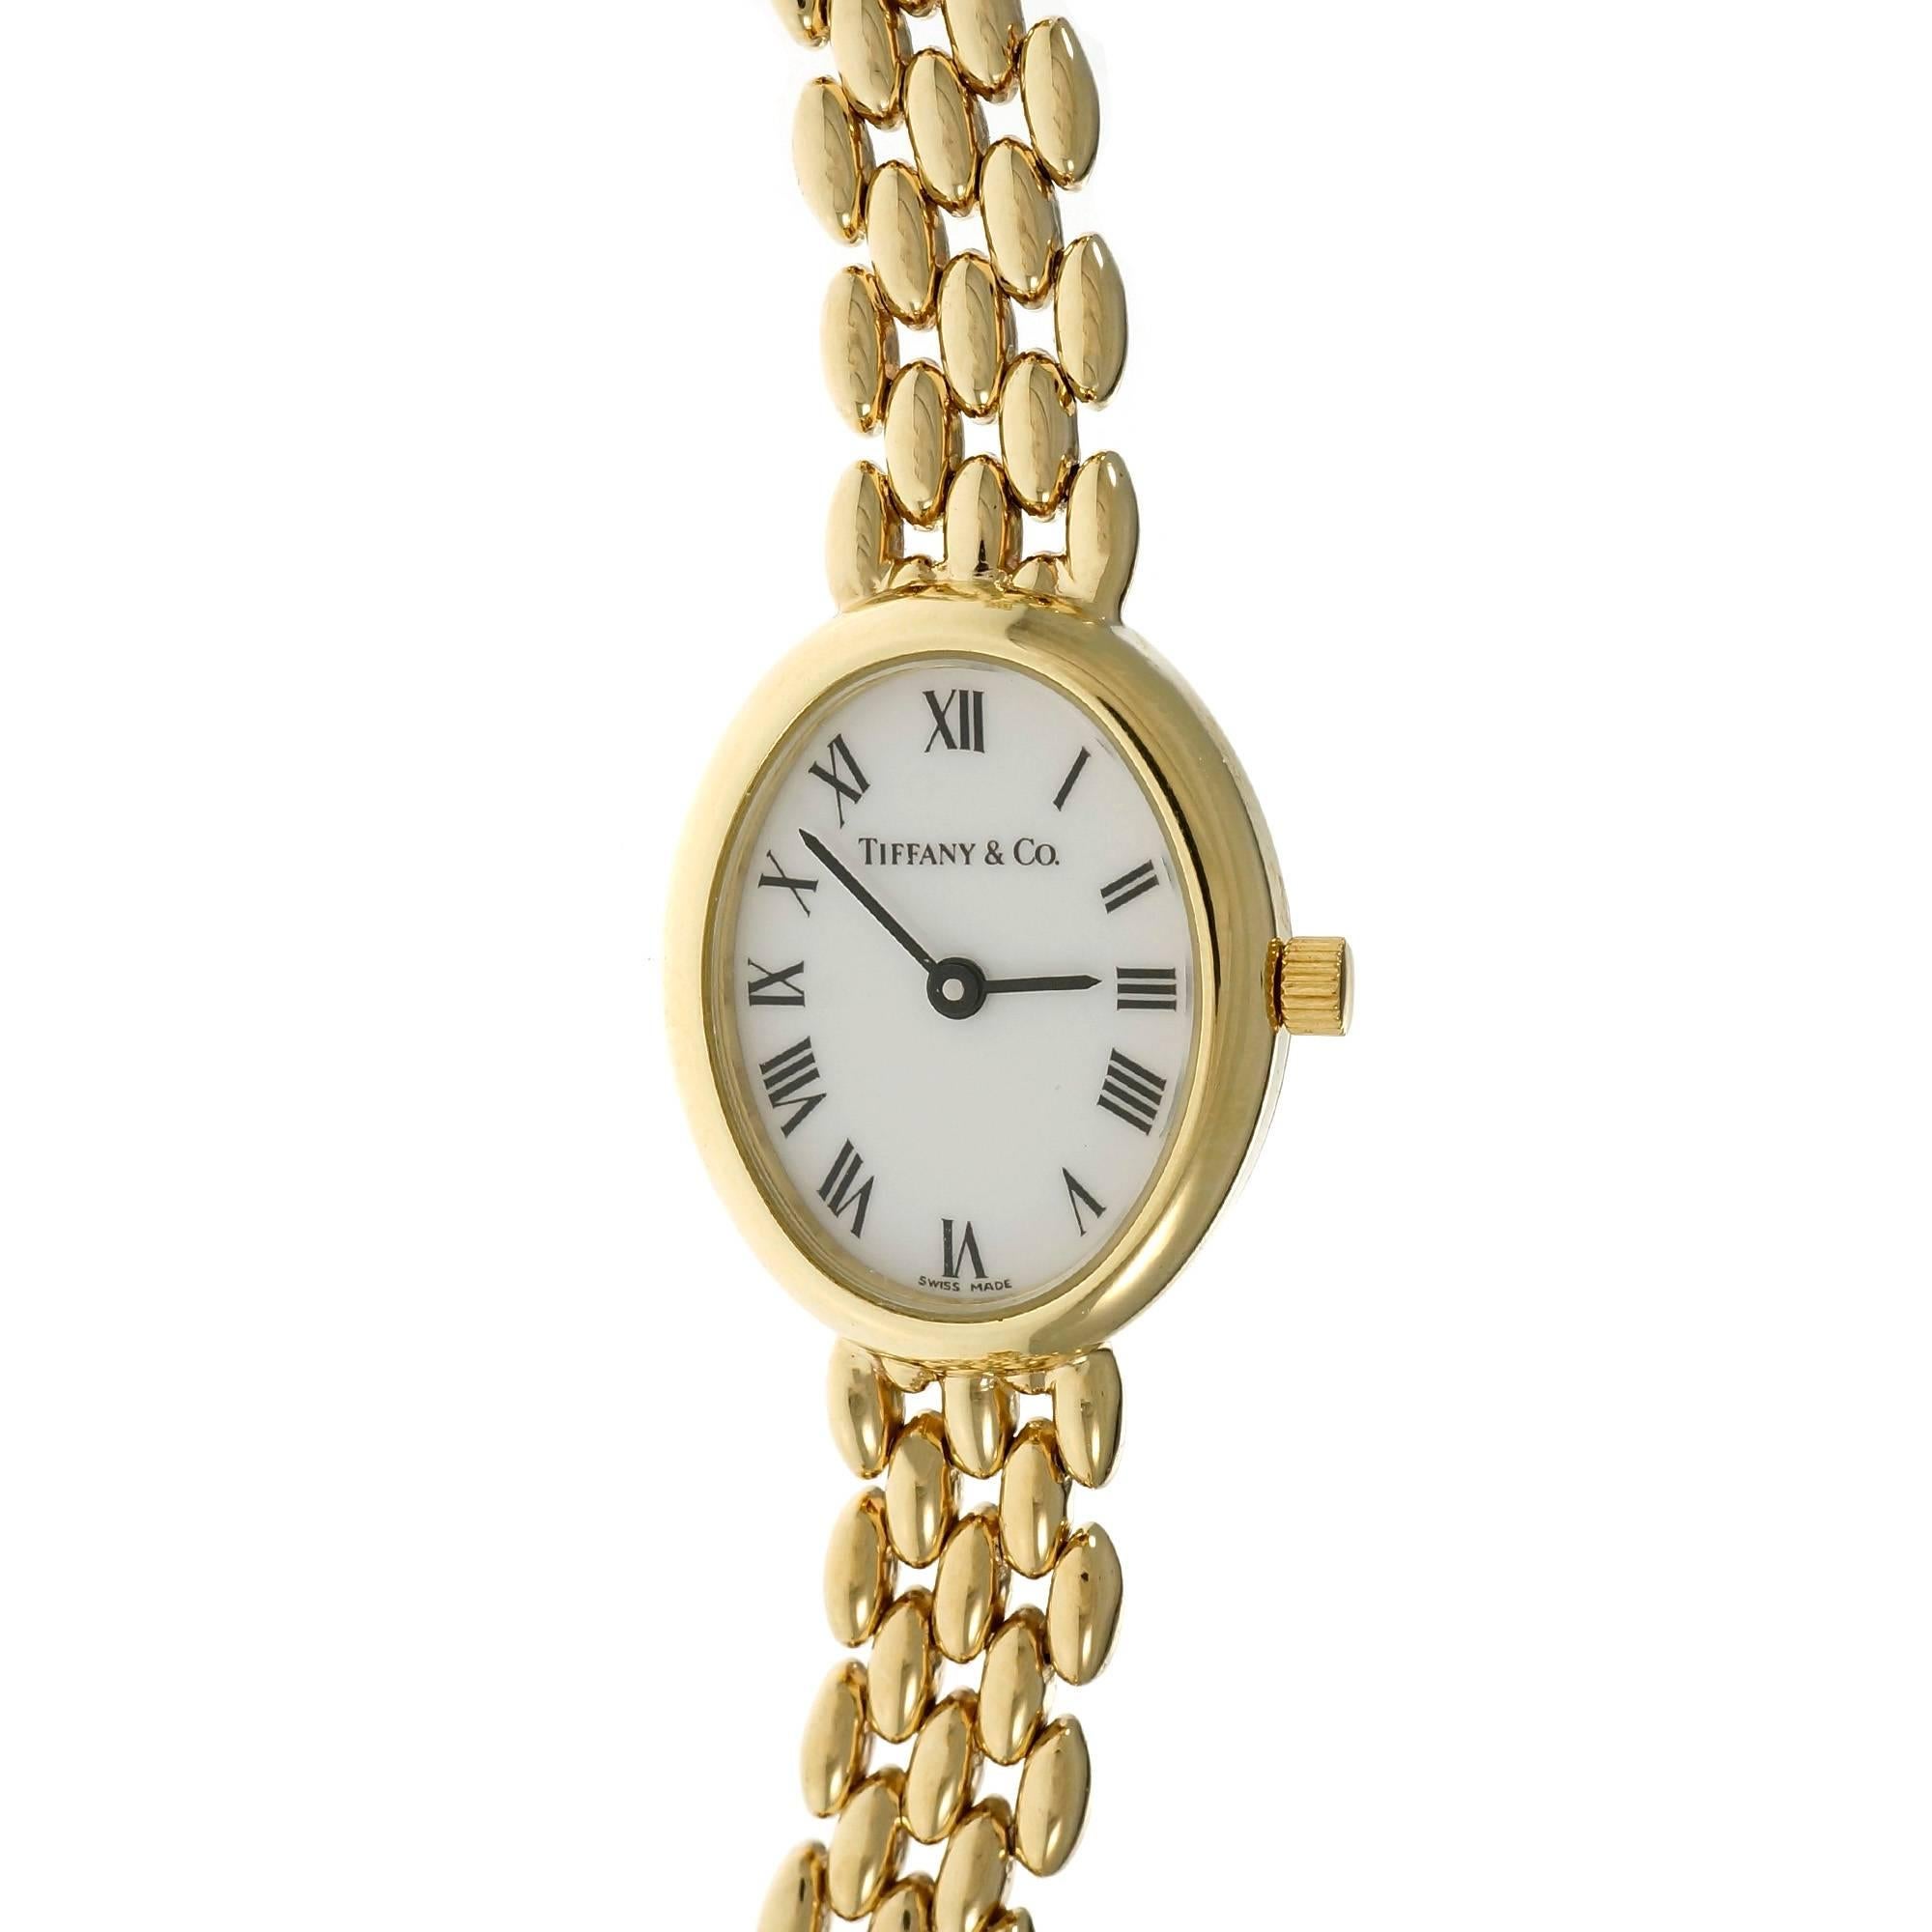 Tiffany & Co. Ladies Gold Five Row Panther Wristwatch